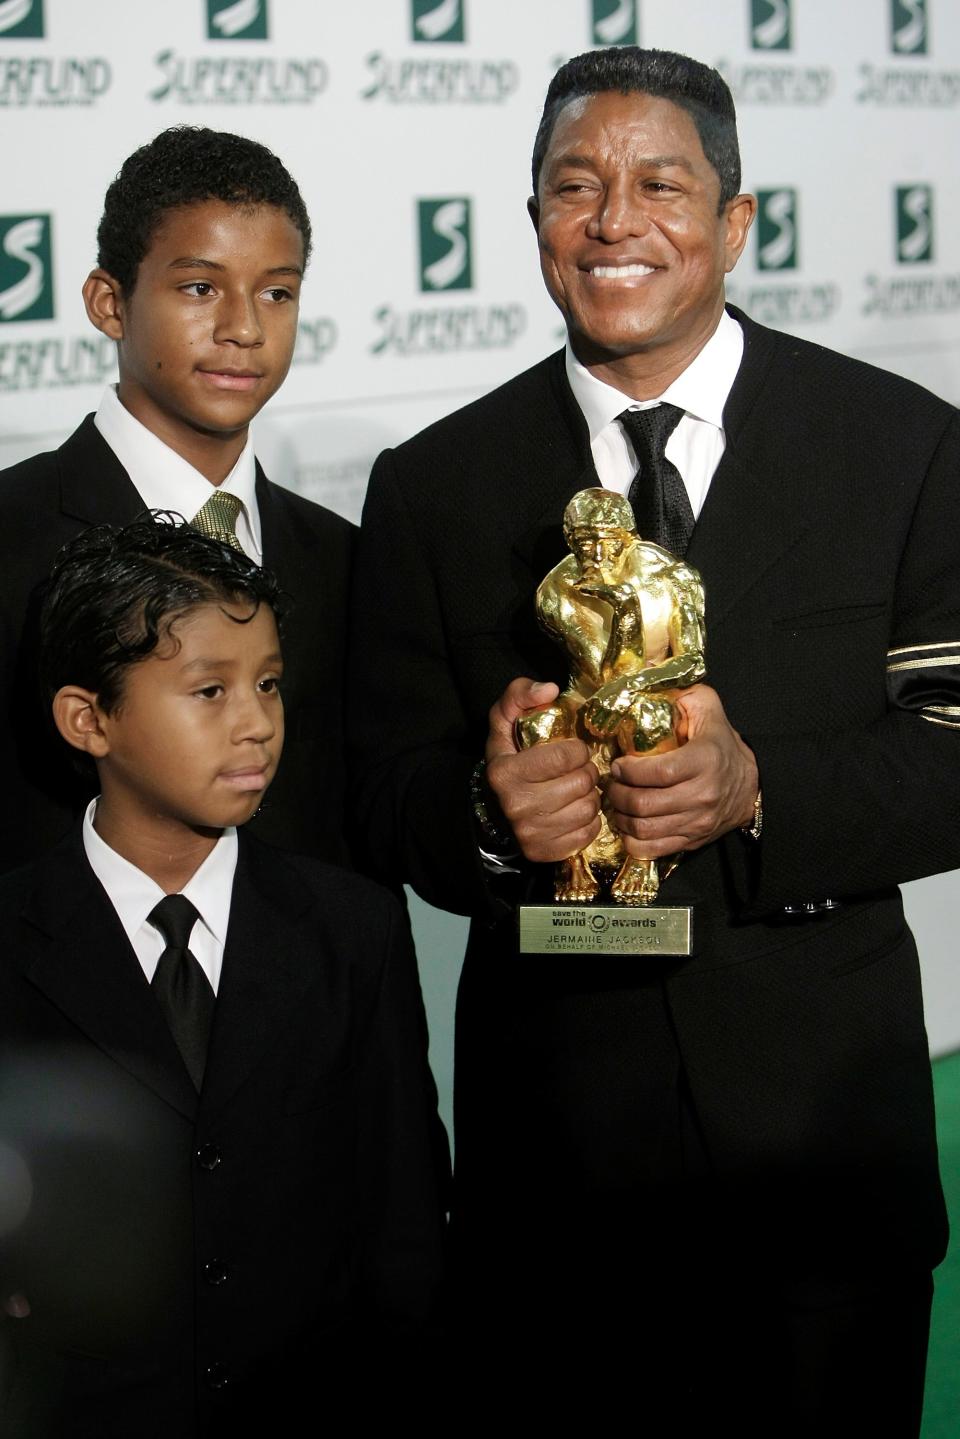 Jermaine Jackson and his sons Jaafar and Jermajesty attend the Save The World Awards at the nuclear power station Zwentendorf on July 24, 2009 in Zwentendorf nearby Vienna, Austria.